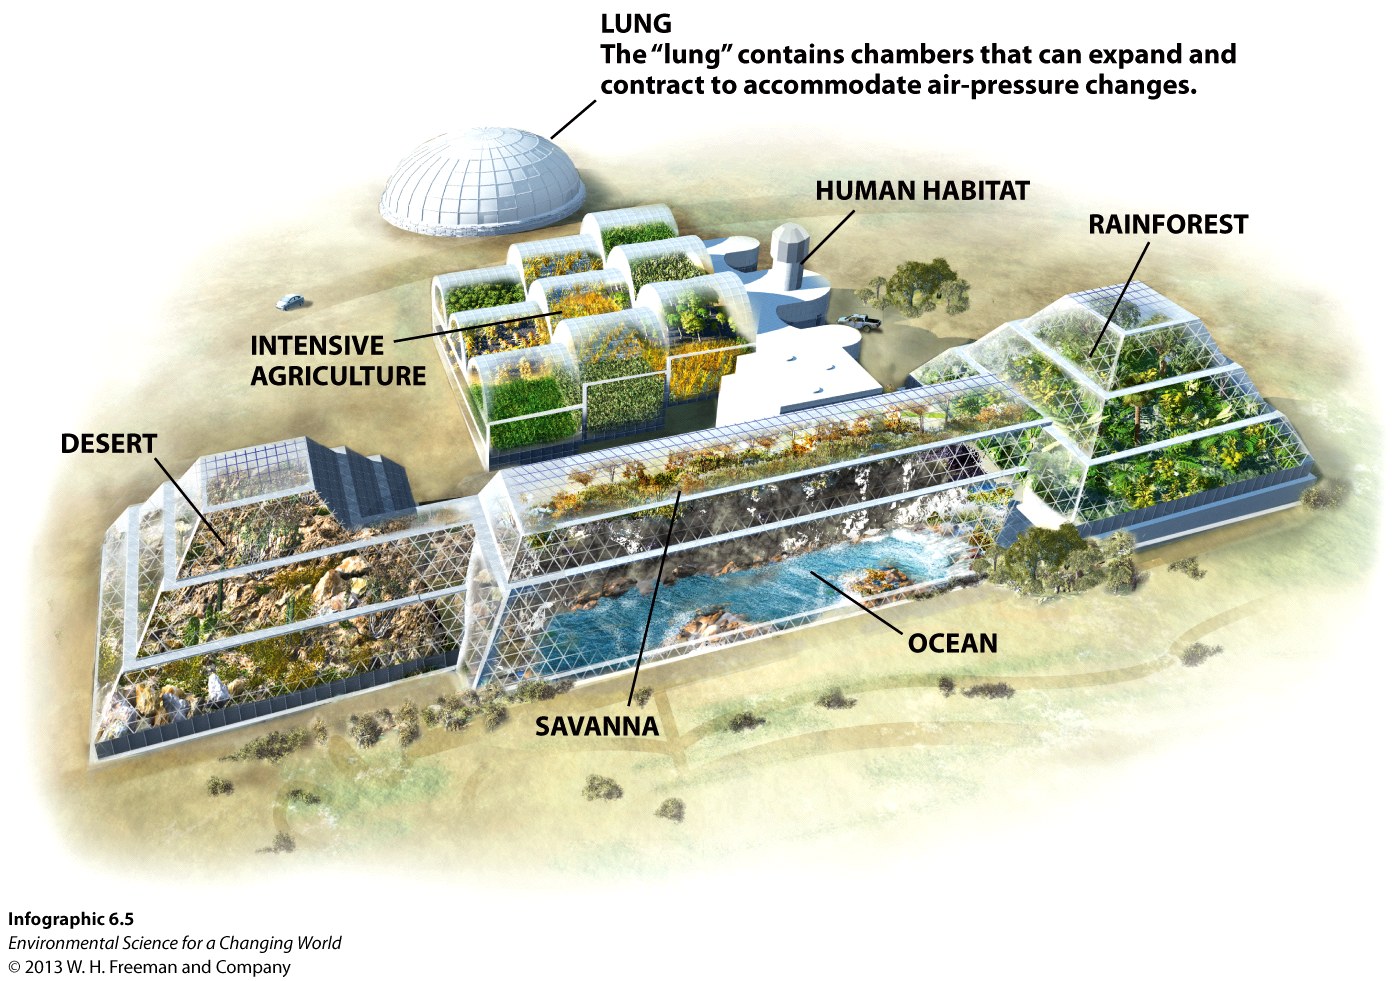 Infographic 6.5: Map of Biosphere 2